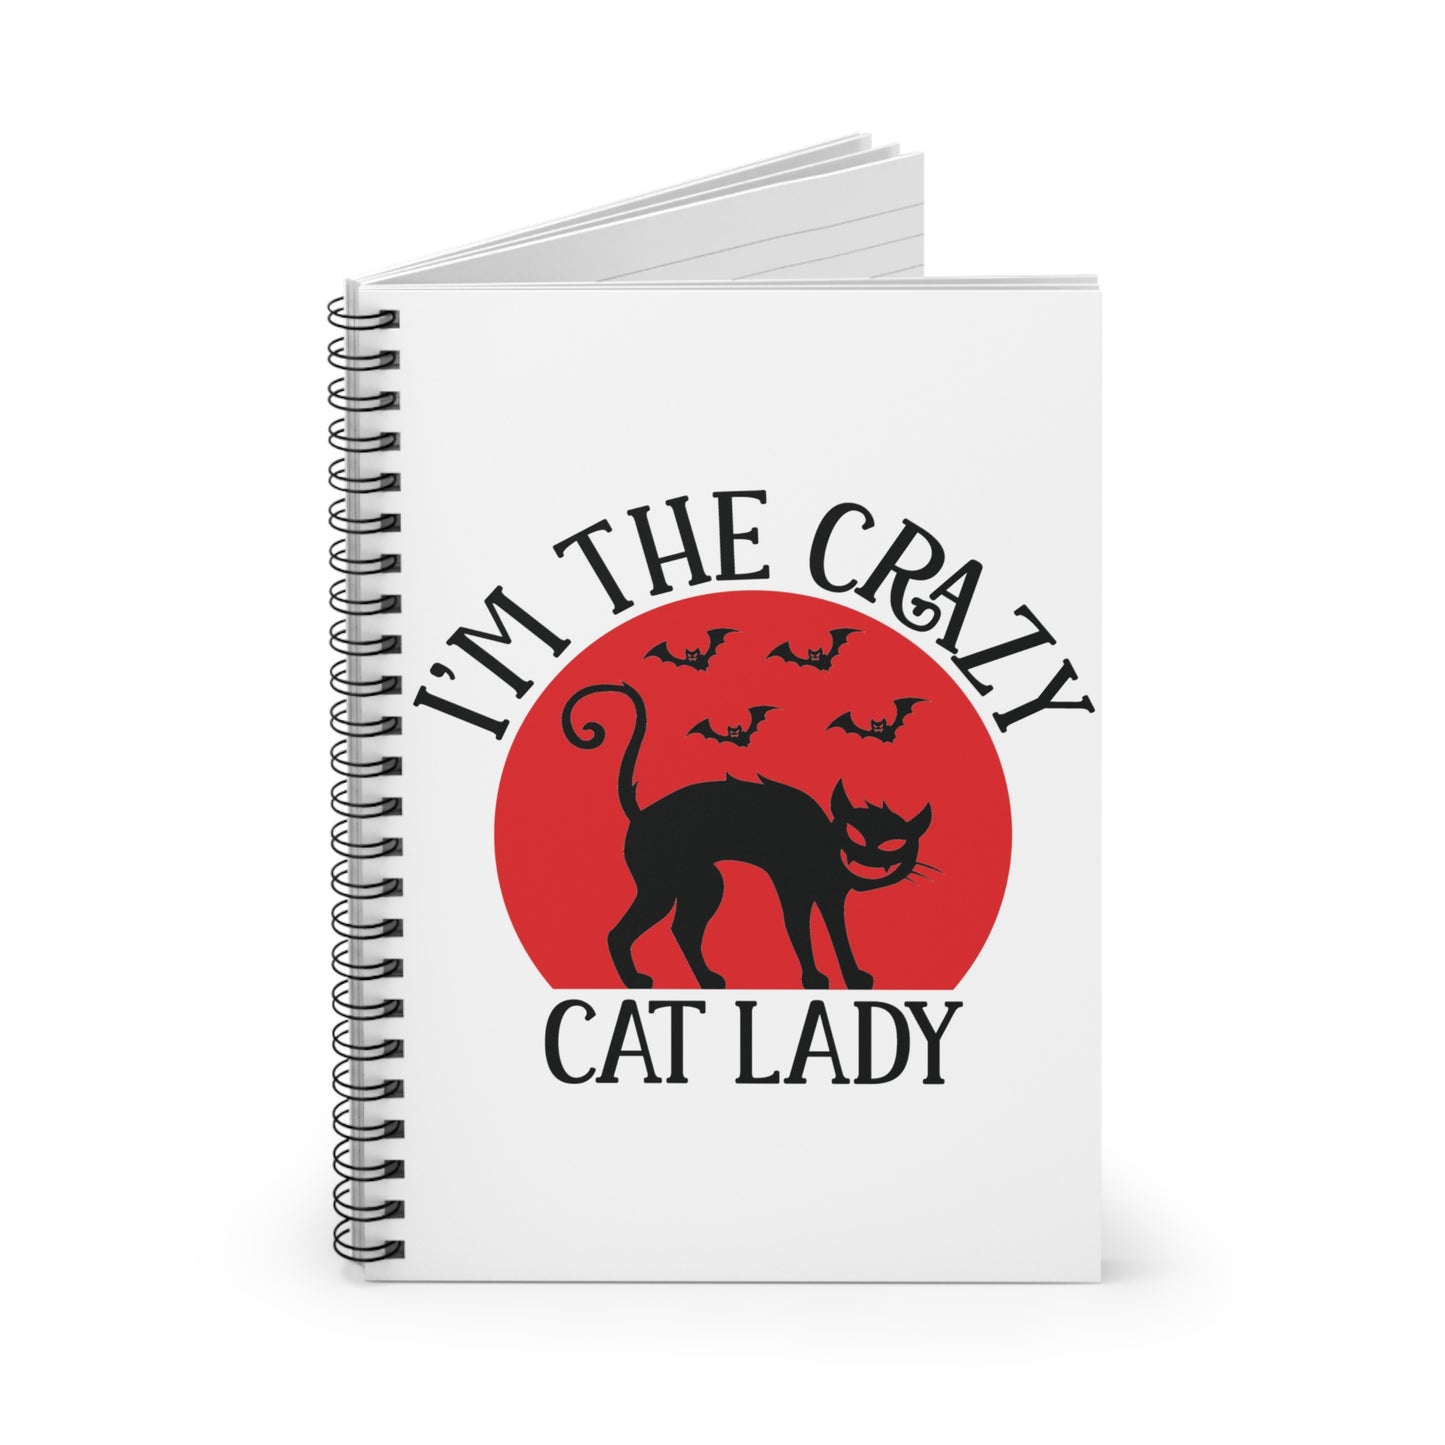 Crazy Cat Lady: Spiral Notebook - Log Books - Journals - Diaries - and More Custom Printed by TheGlassyLass